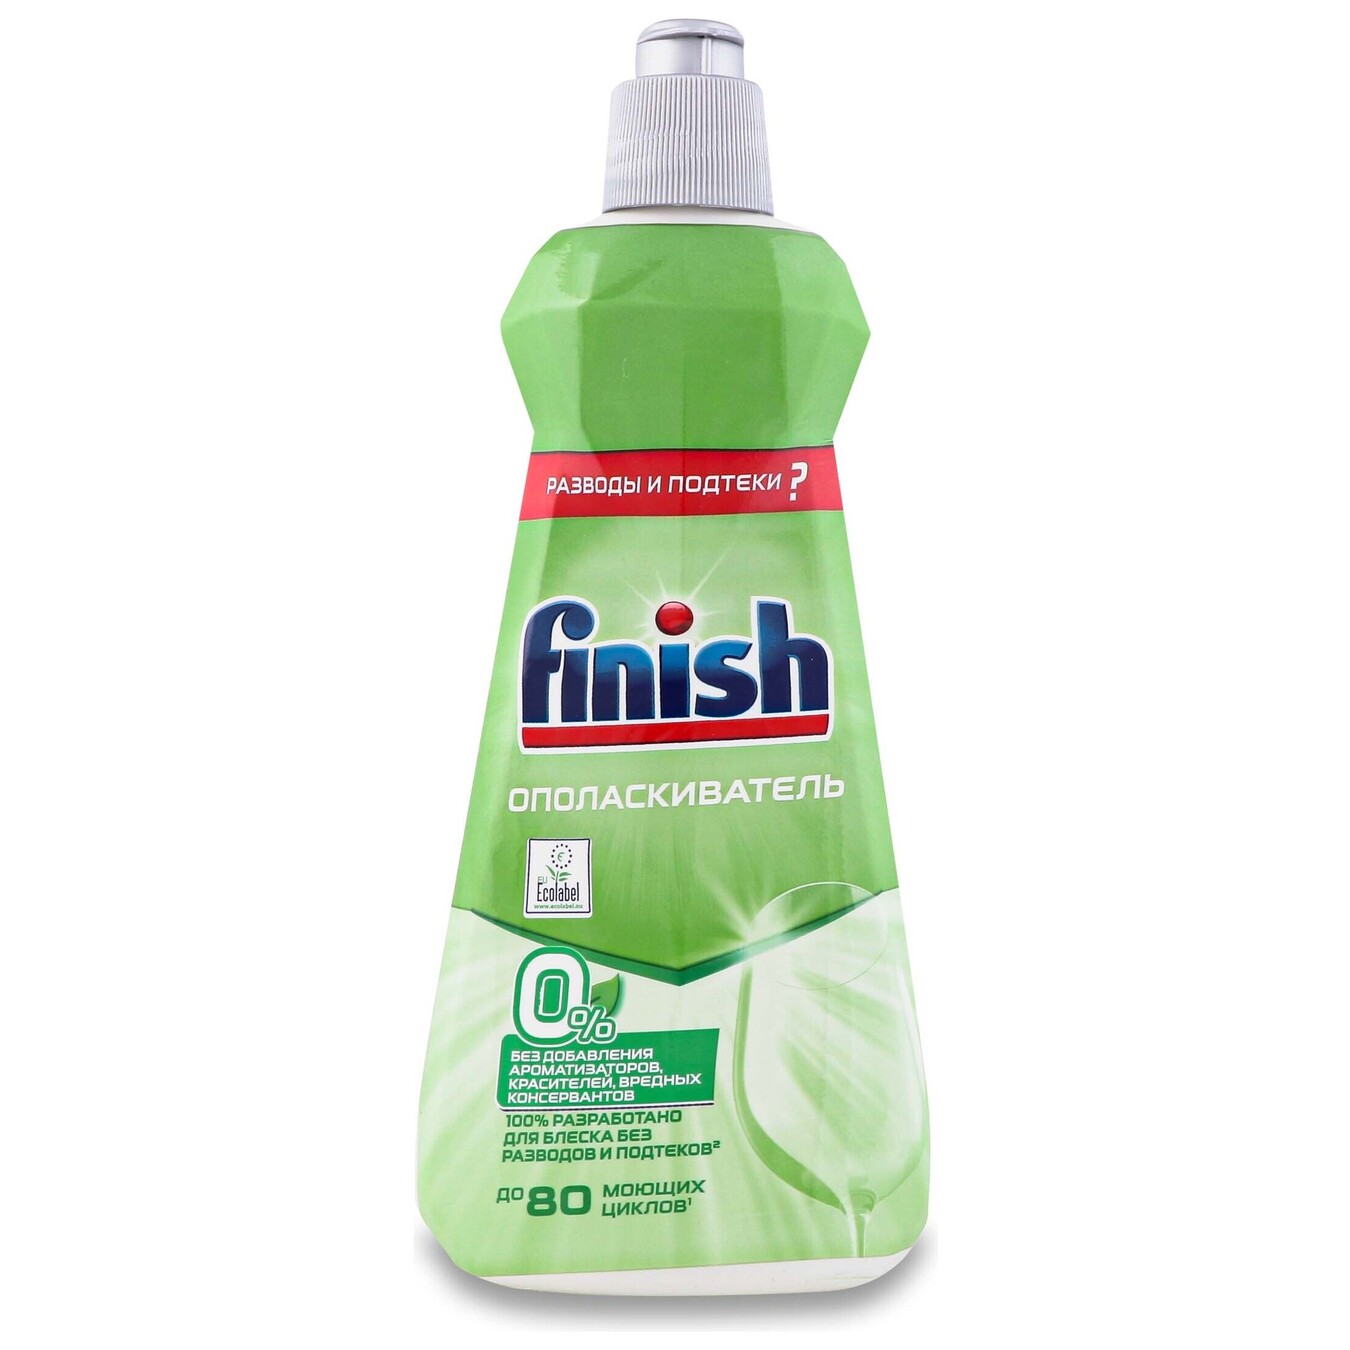 Finish Rinse rinse aid for dishes in dishwashers 0% 400 ml